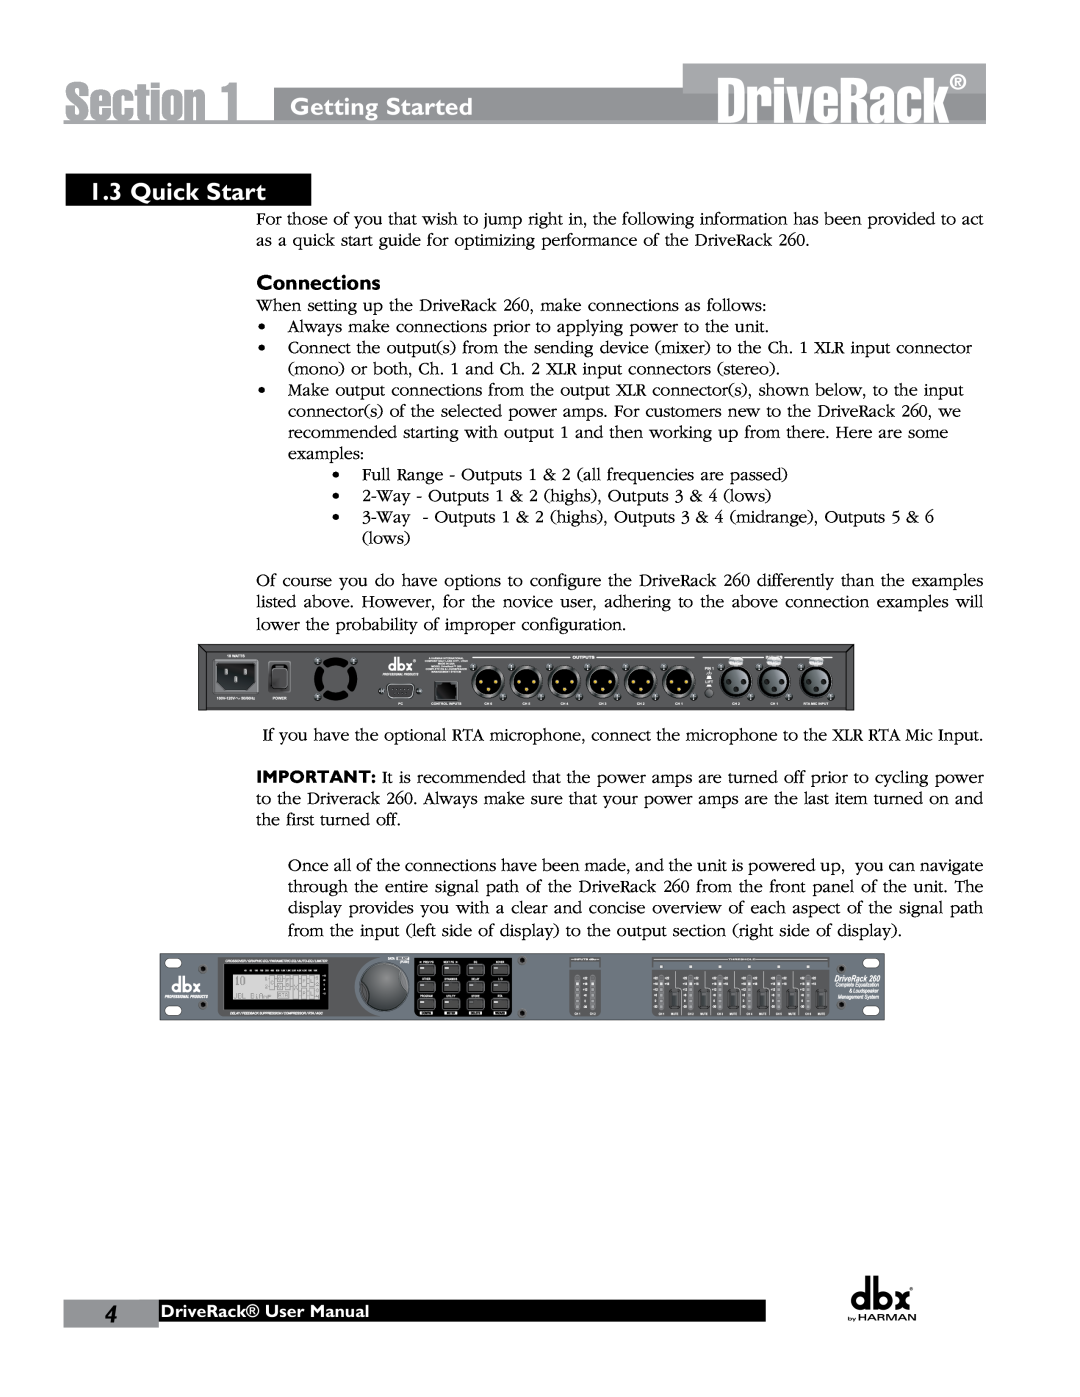 JBL 260 user manual Section, Getting Started, Quick Start, Connections, DriveRack User Manual 